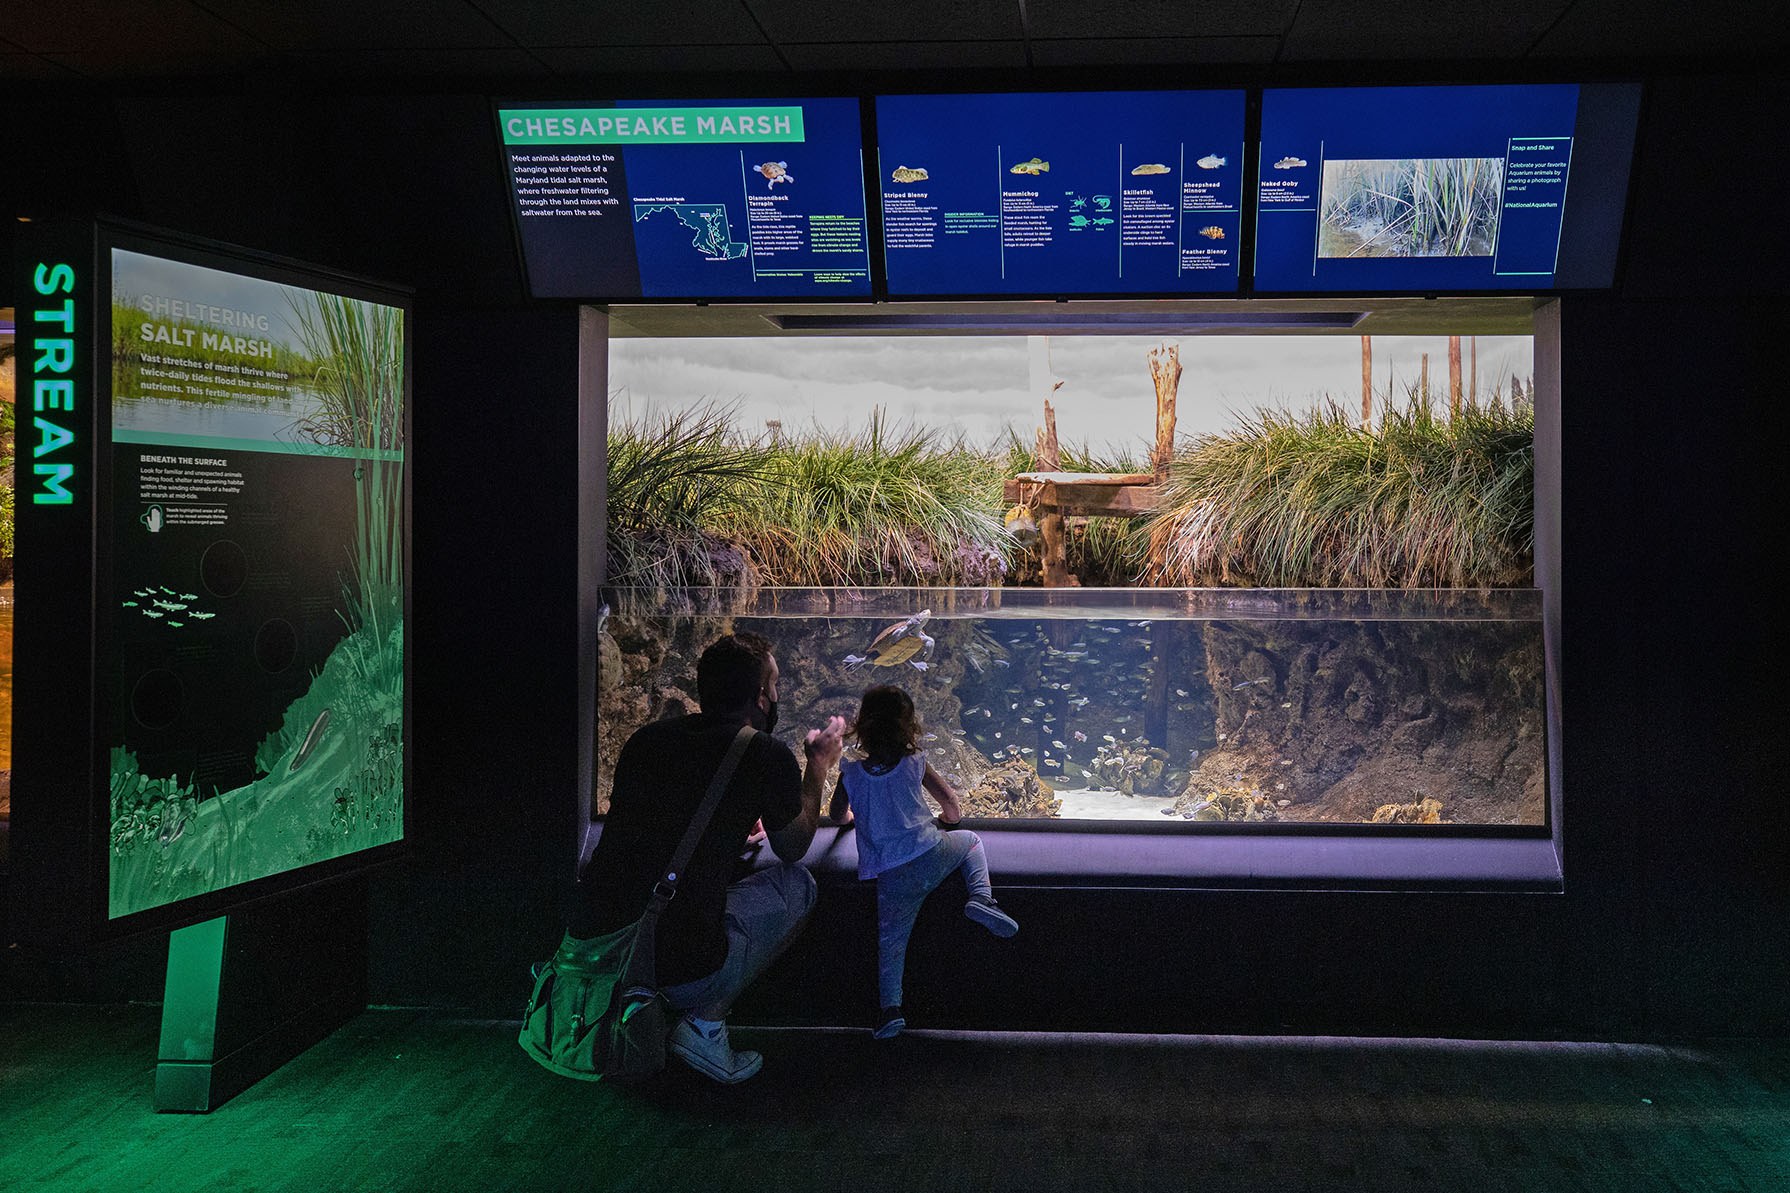 Adult and Child Looking at Turtle in Chesapeake Marsh Exhibit